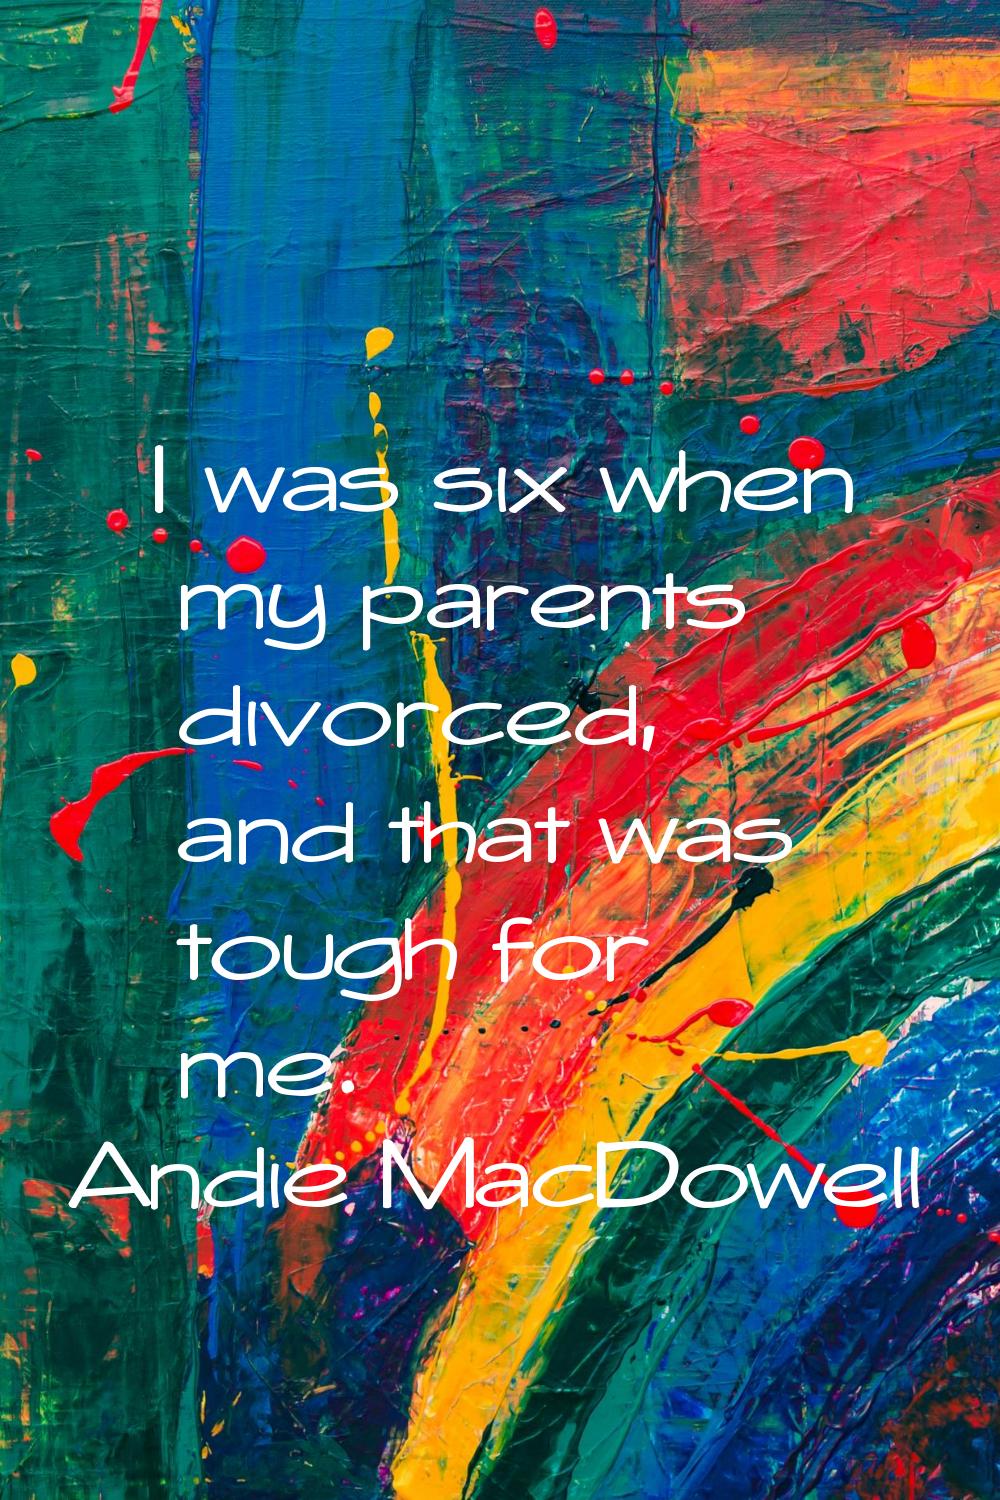 I was six when my parents divorced, and that was tough for me.